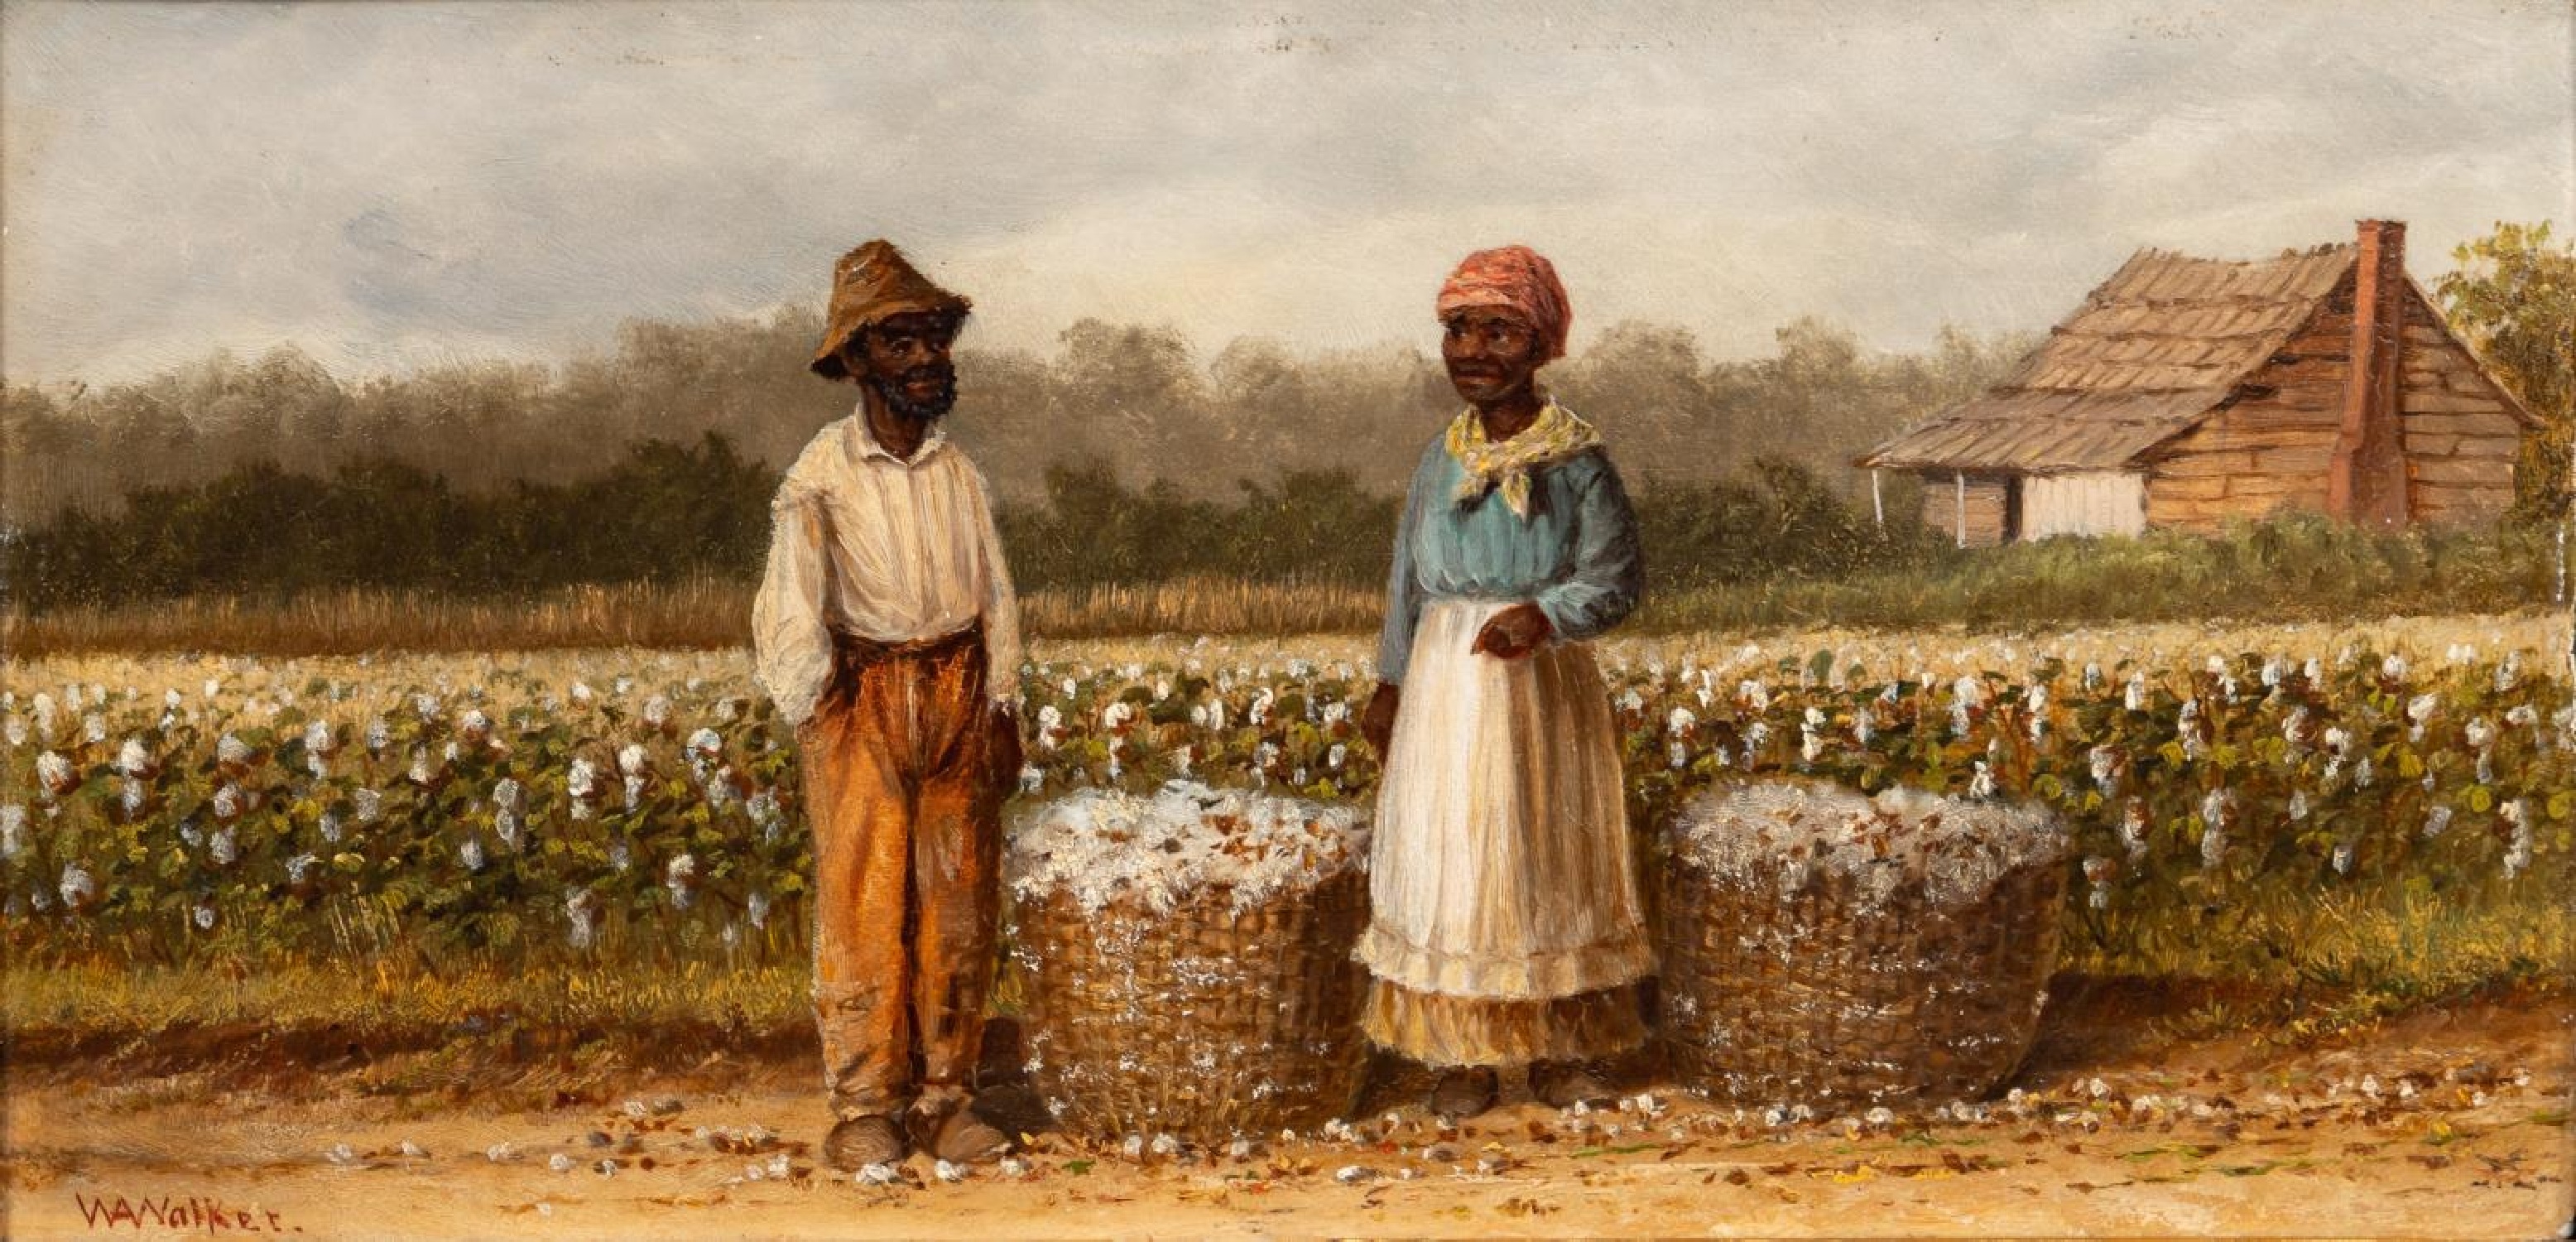 WILLIAM AIKEN WALKER, COTTON PICKERS AND CABIN - Image 7 of 7